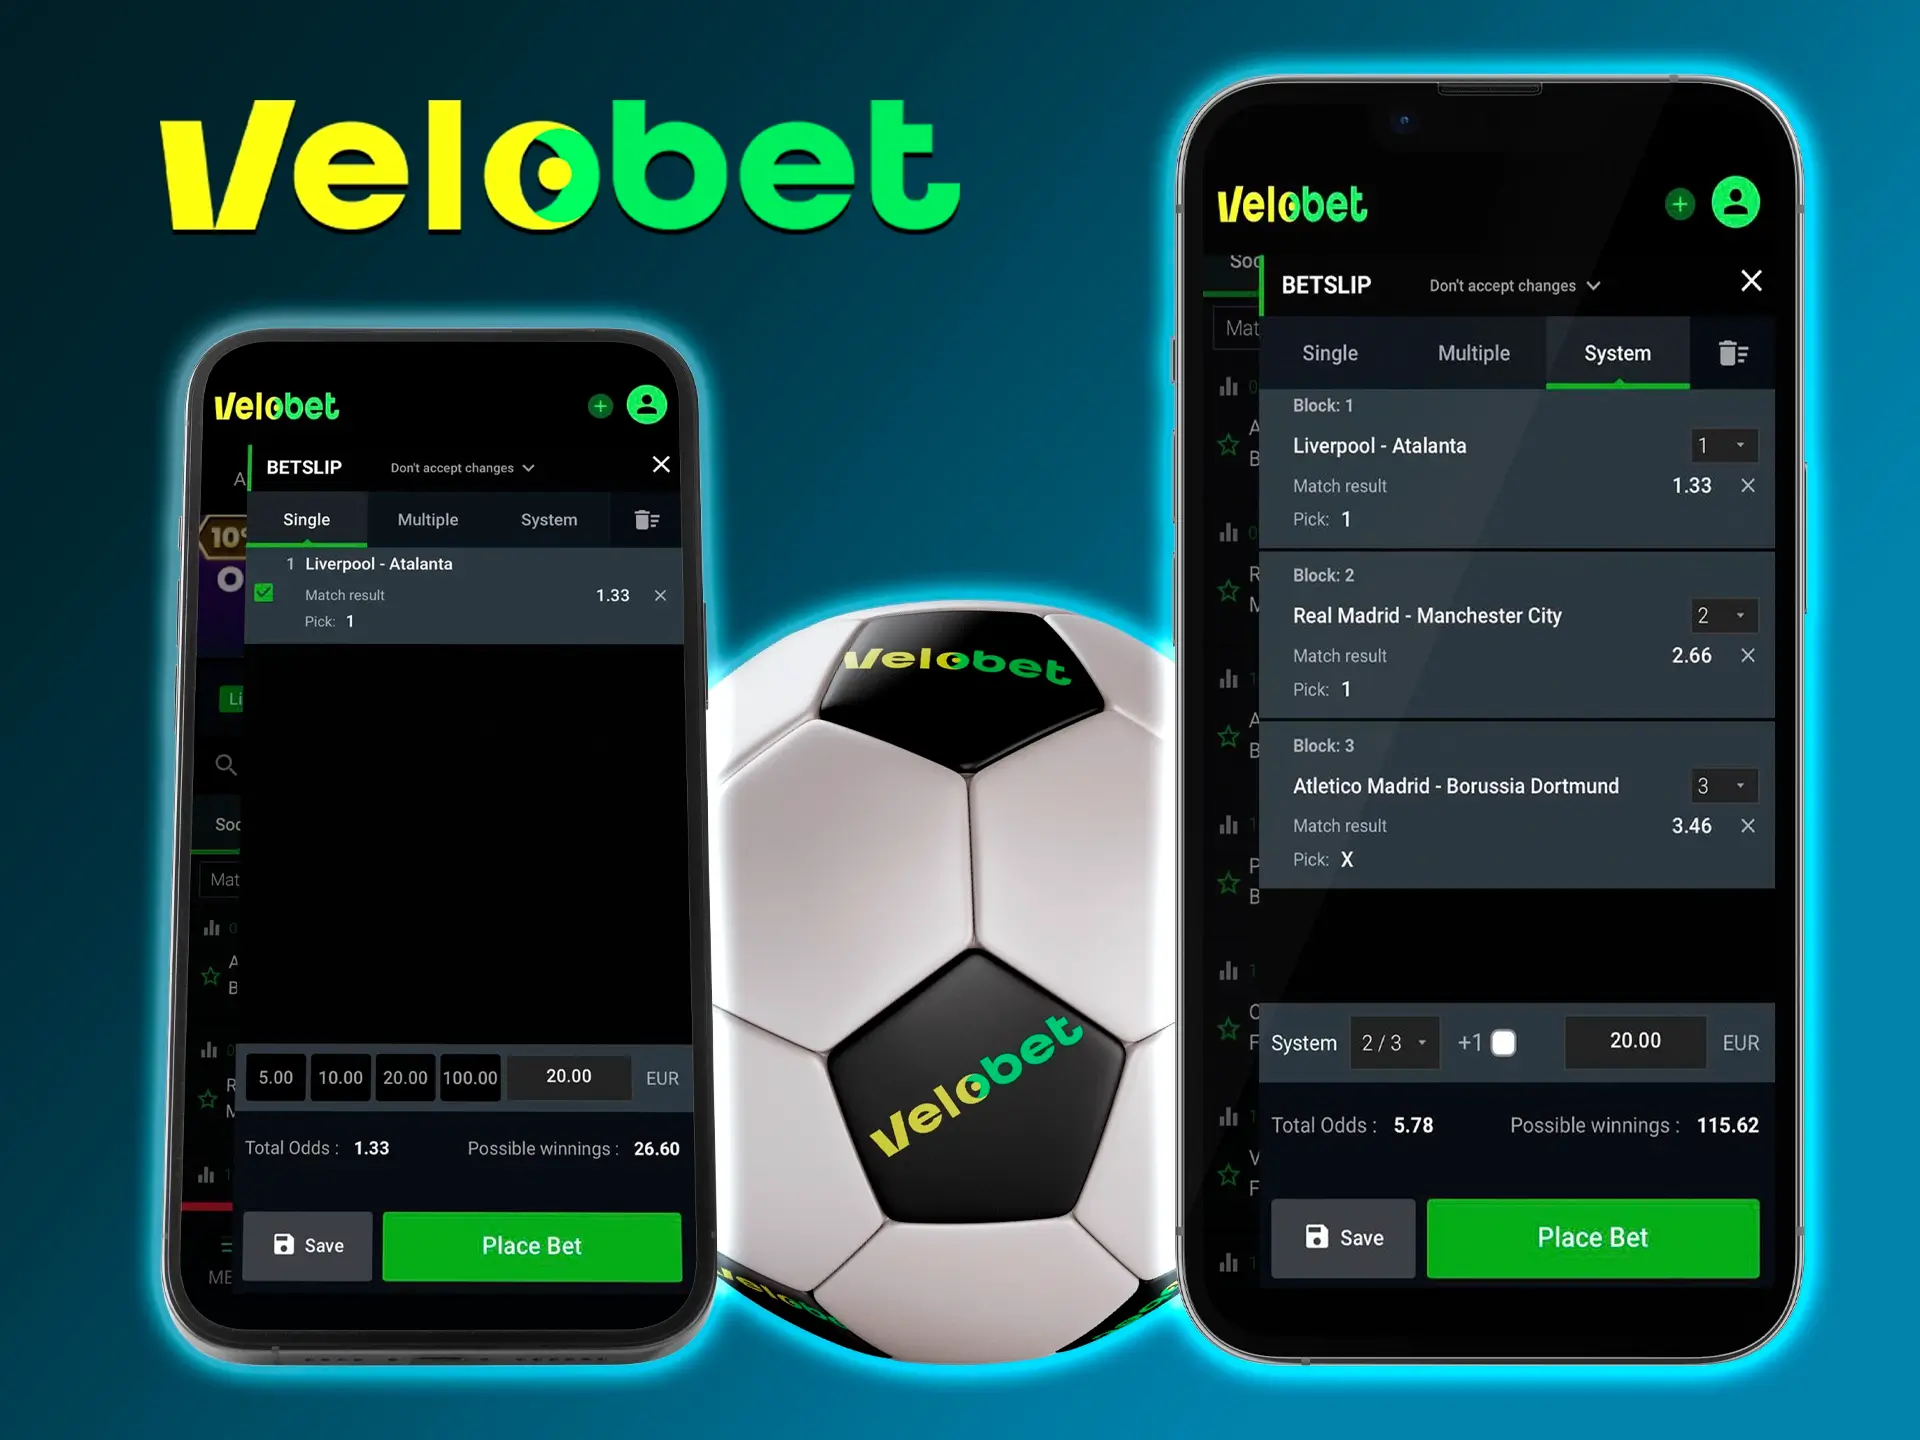 Find a favourable bet type and make accurate sports predictions at Velobet.